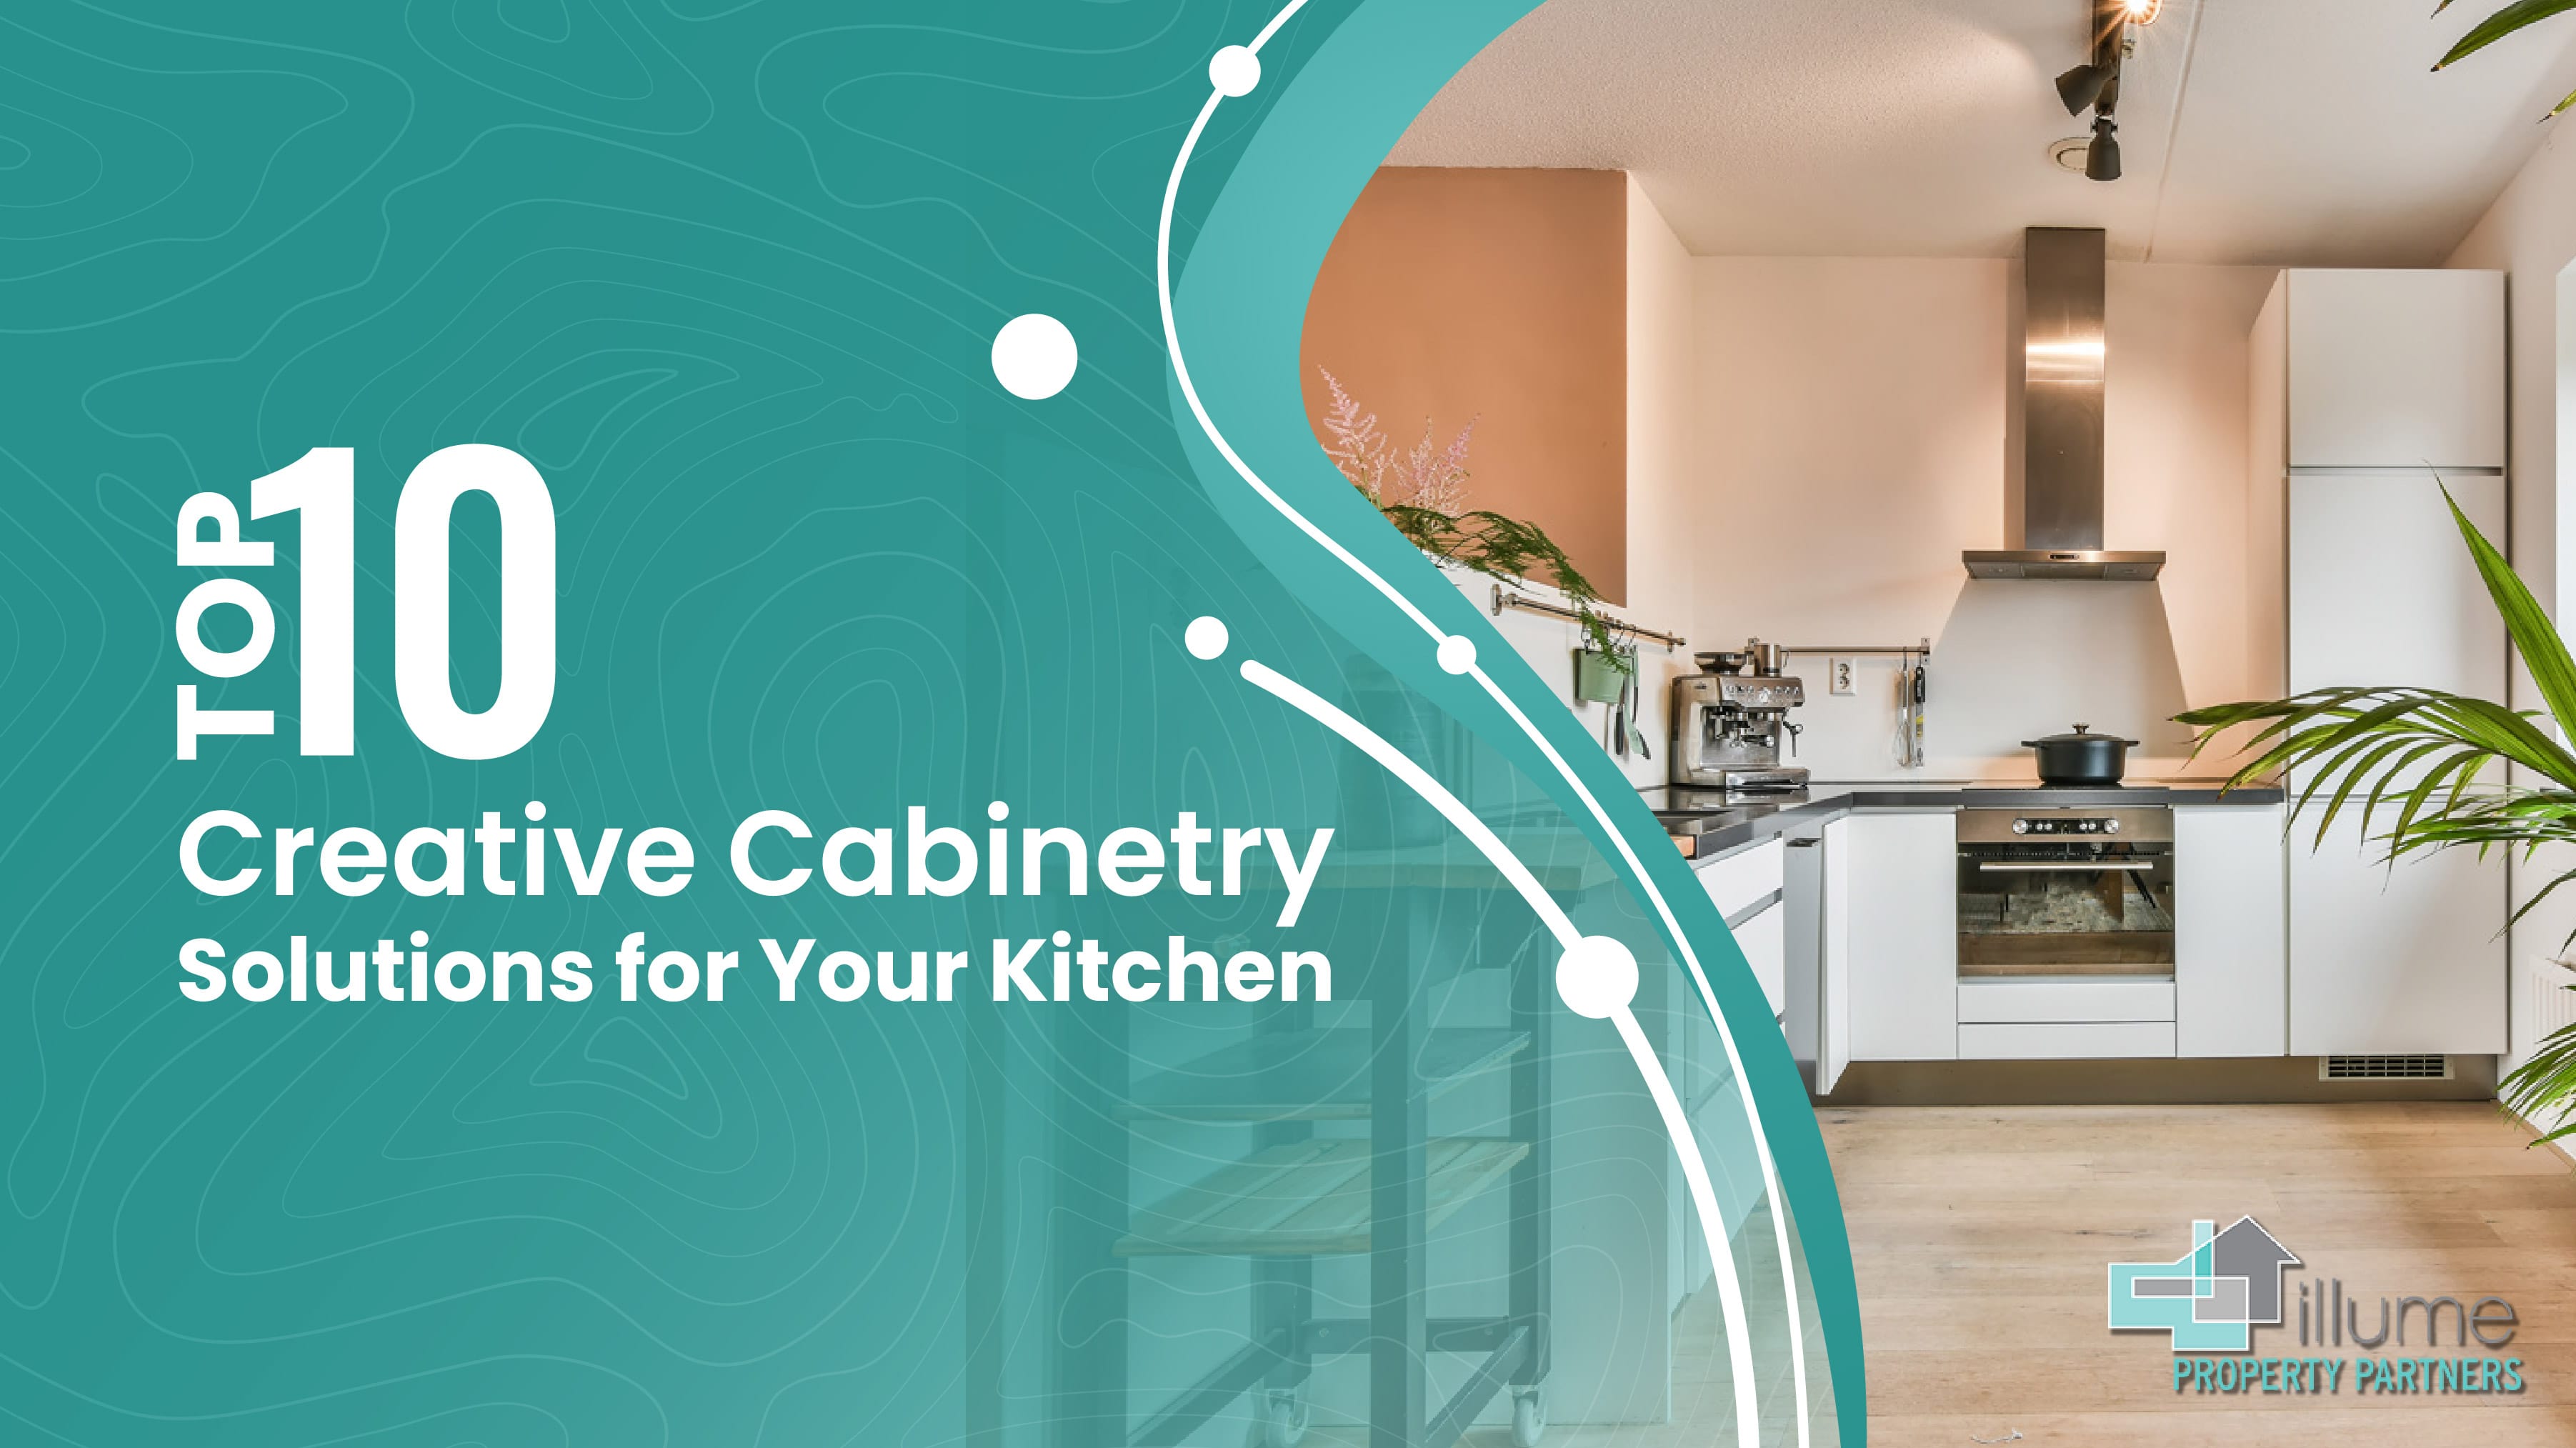 Top 10 Creative Cabinetry Solutions for Your Kitchen